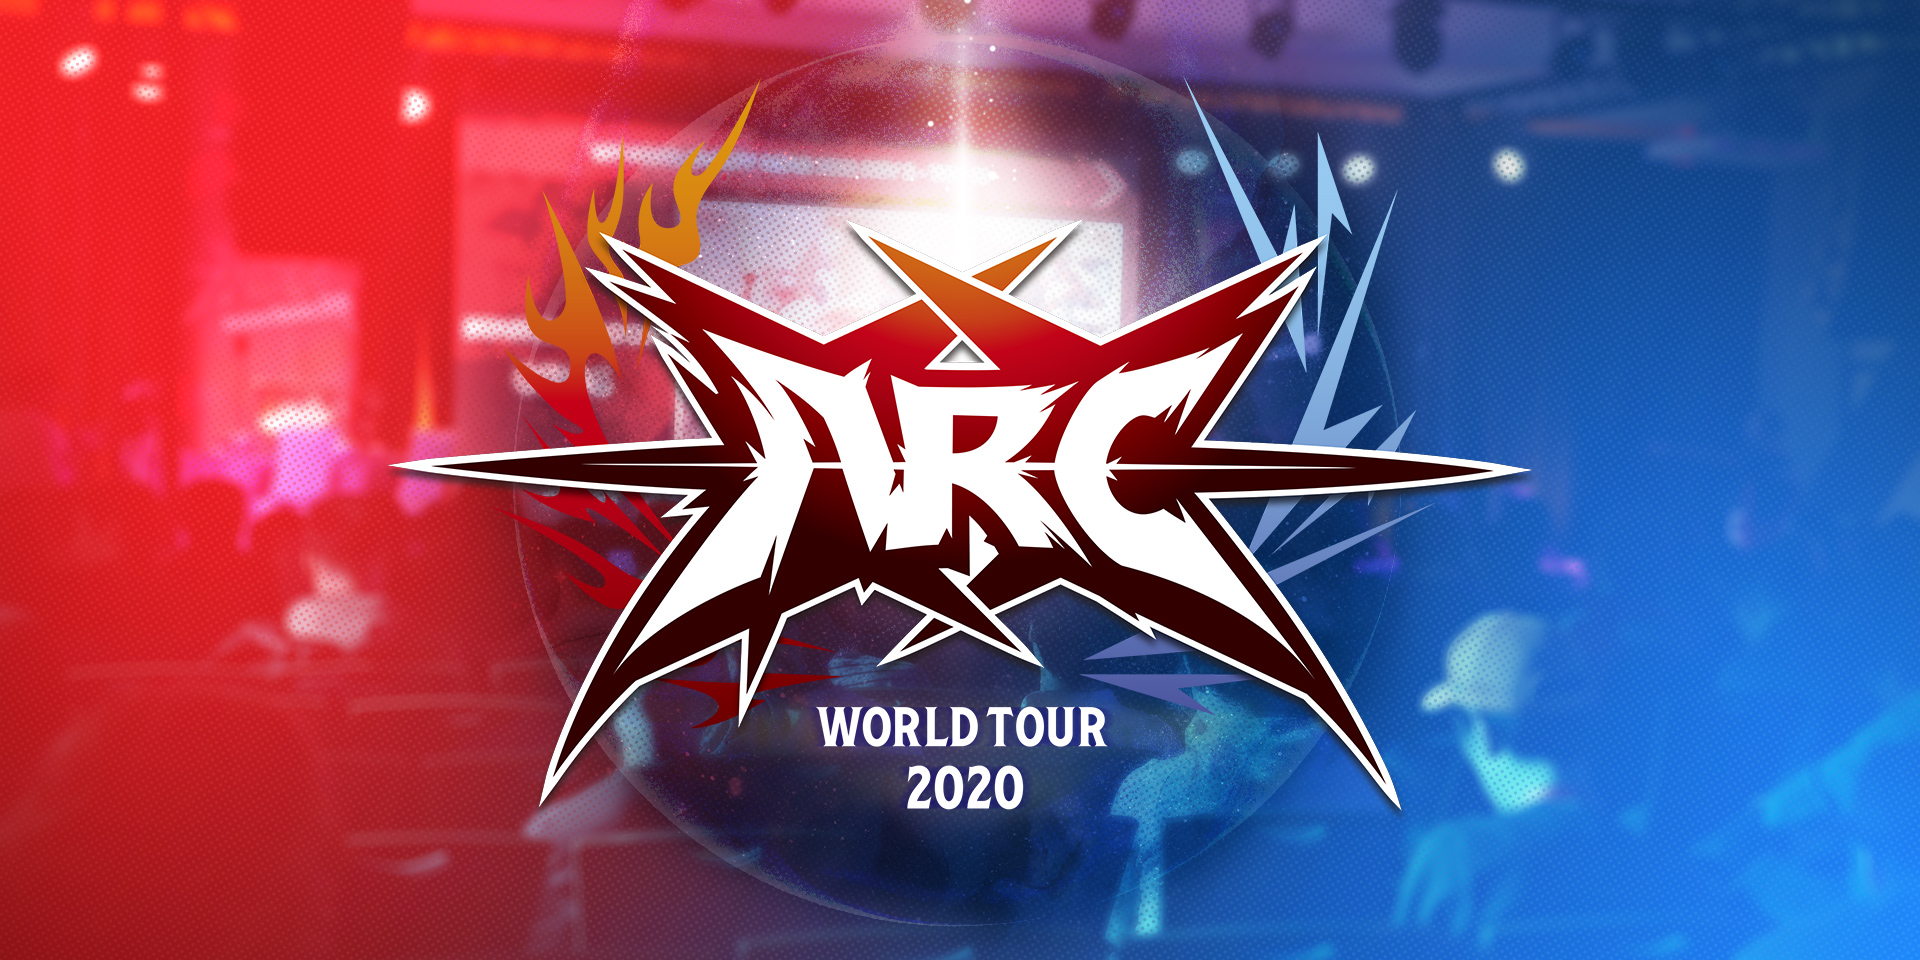 Notice of Cancellation of ARC WORLD TOUR 2020